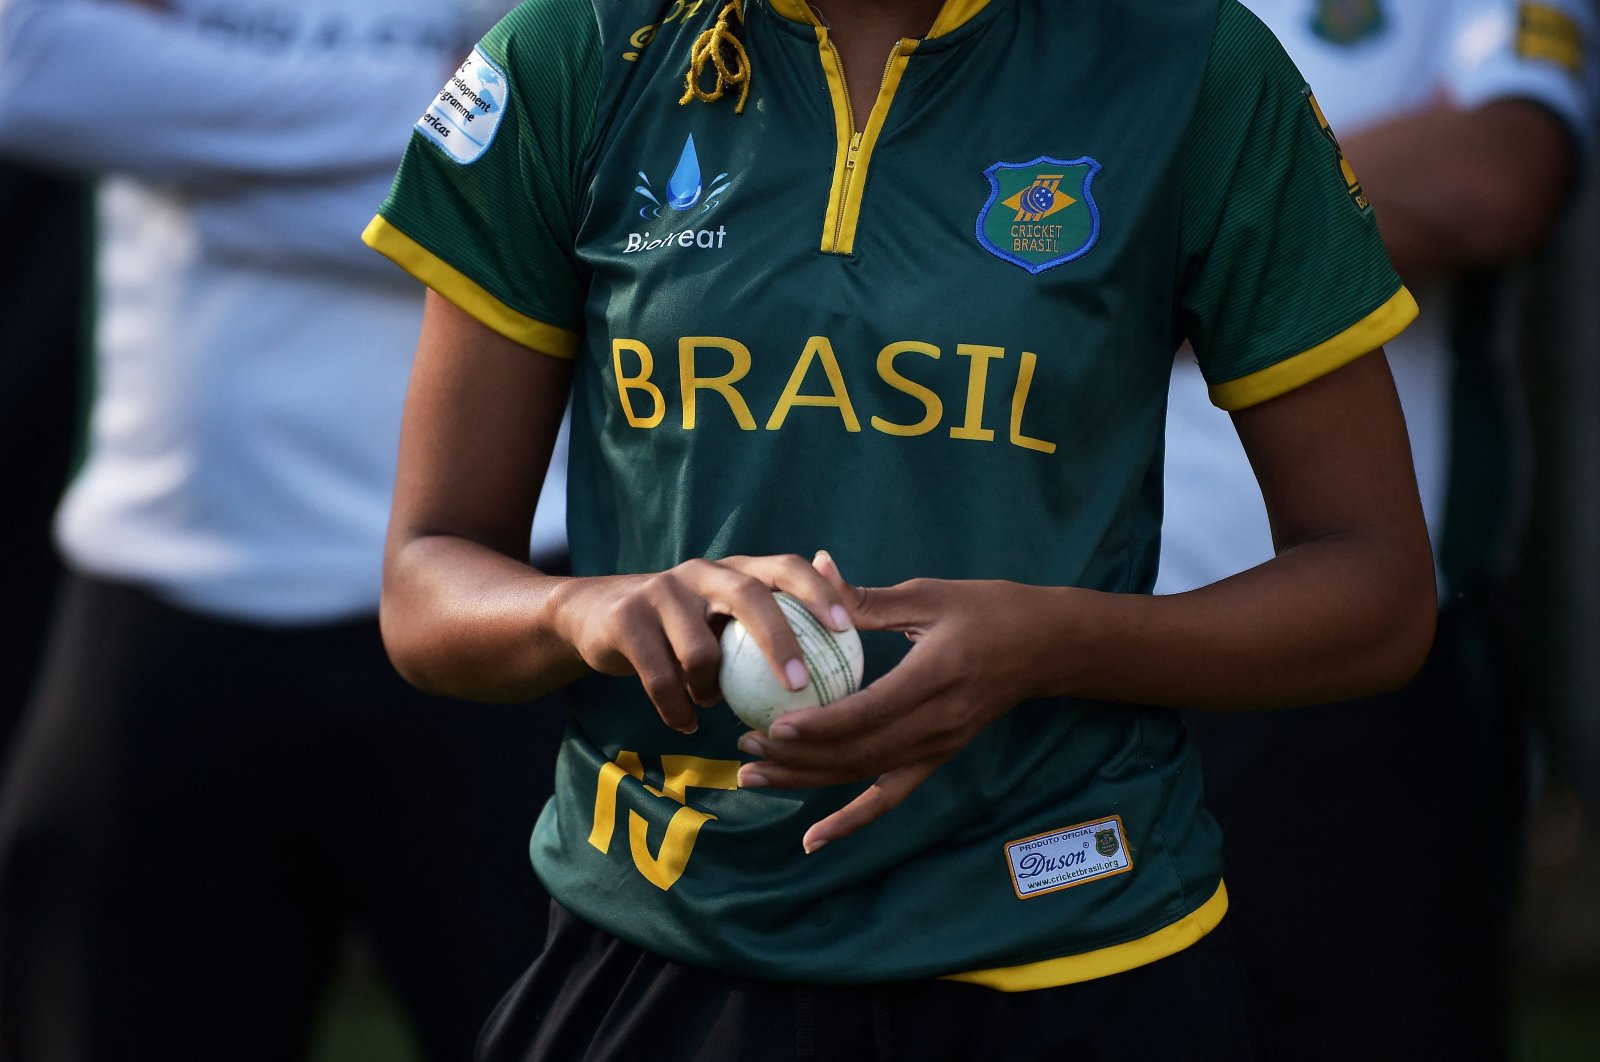 Lindsay Mariano Vilas Boas, from the Cricket Brazil professional women’s team, trains at a high-performance center in Poco de Caldas, Minas Gerais state, Brazil, May 24, 2022. (AFP Photo)